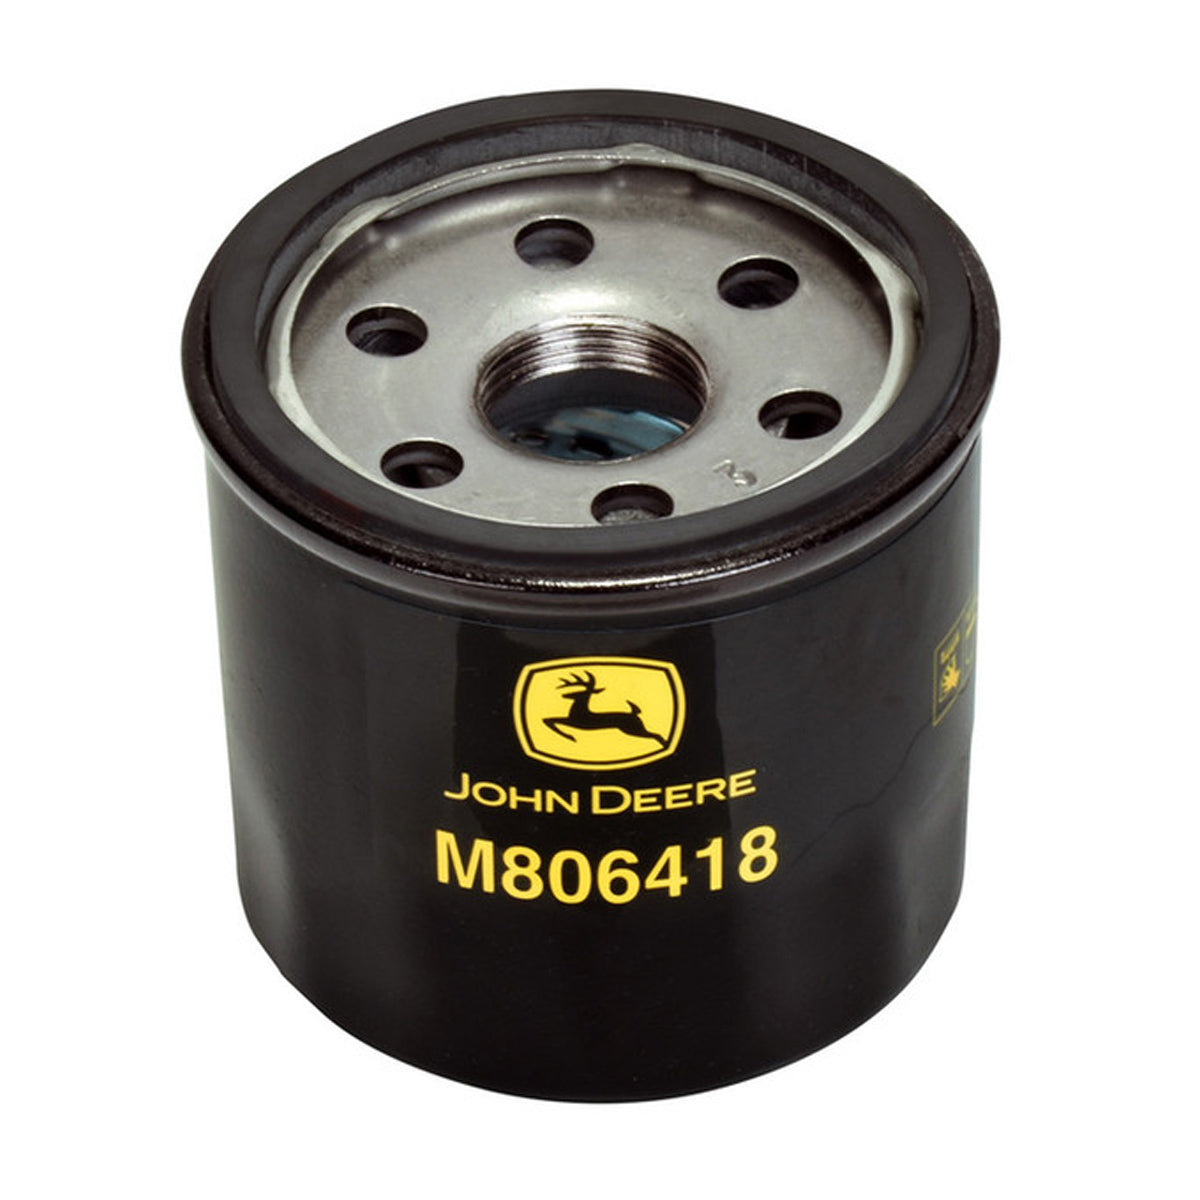 John Deere Engine Oil Filter for 300, 400, GX, Front Mount, 1400, 1500, Select Series, Signature Series - M806418